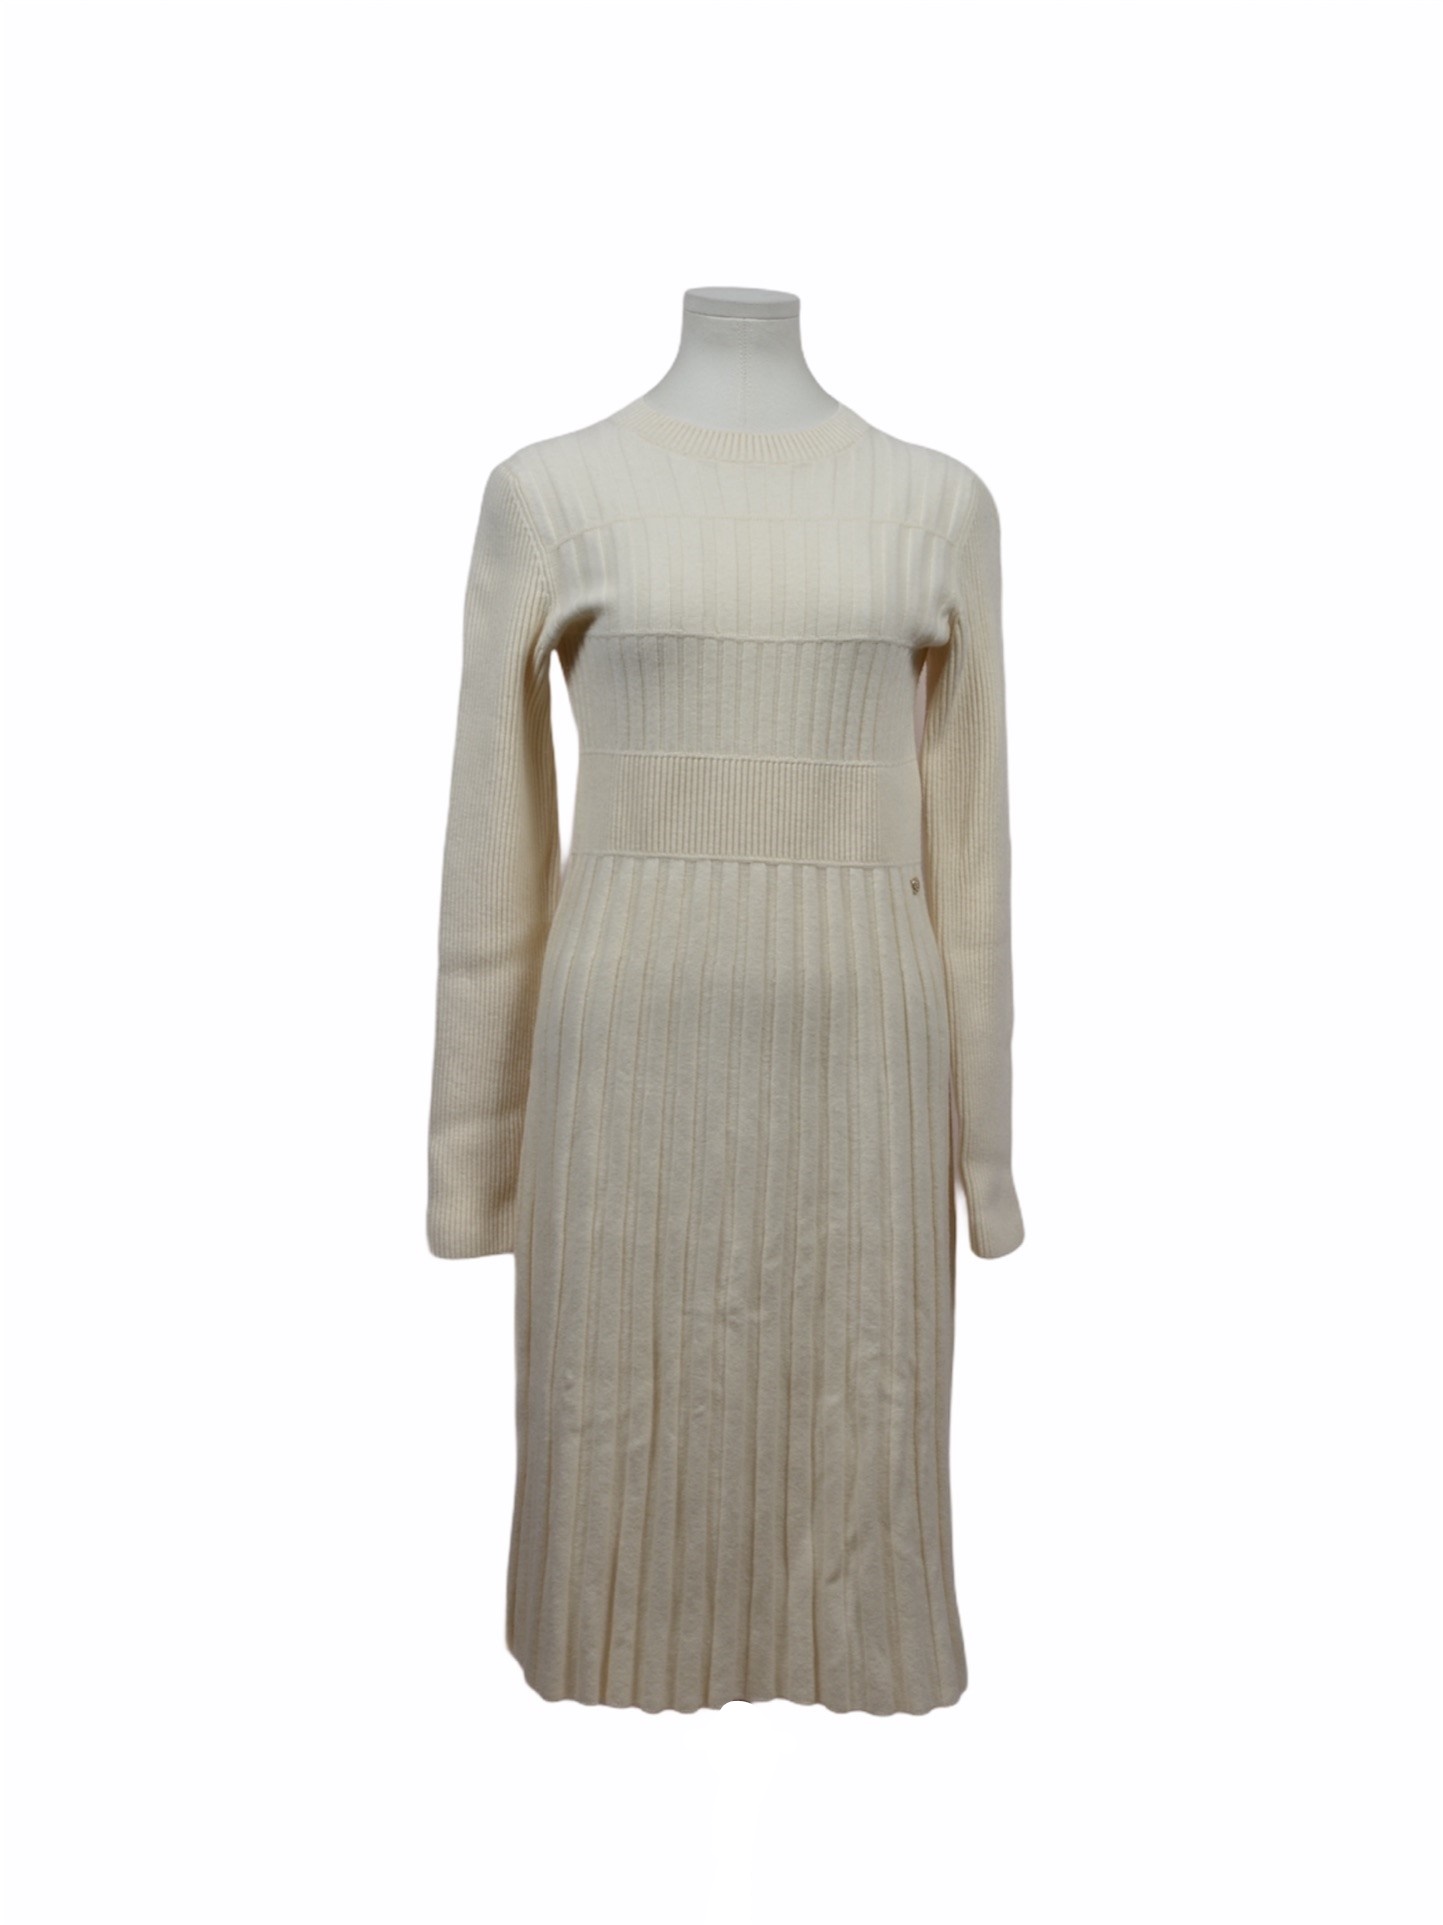 Chanel Strick Kleid Wolle offwhite 42 knit Dress wool